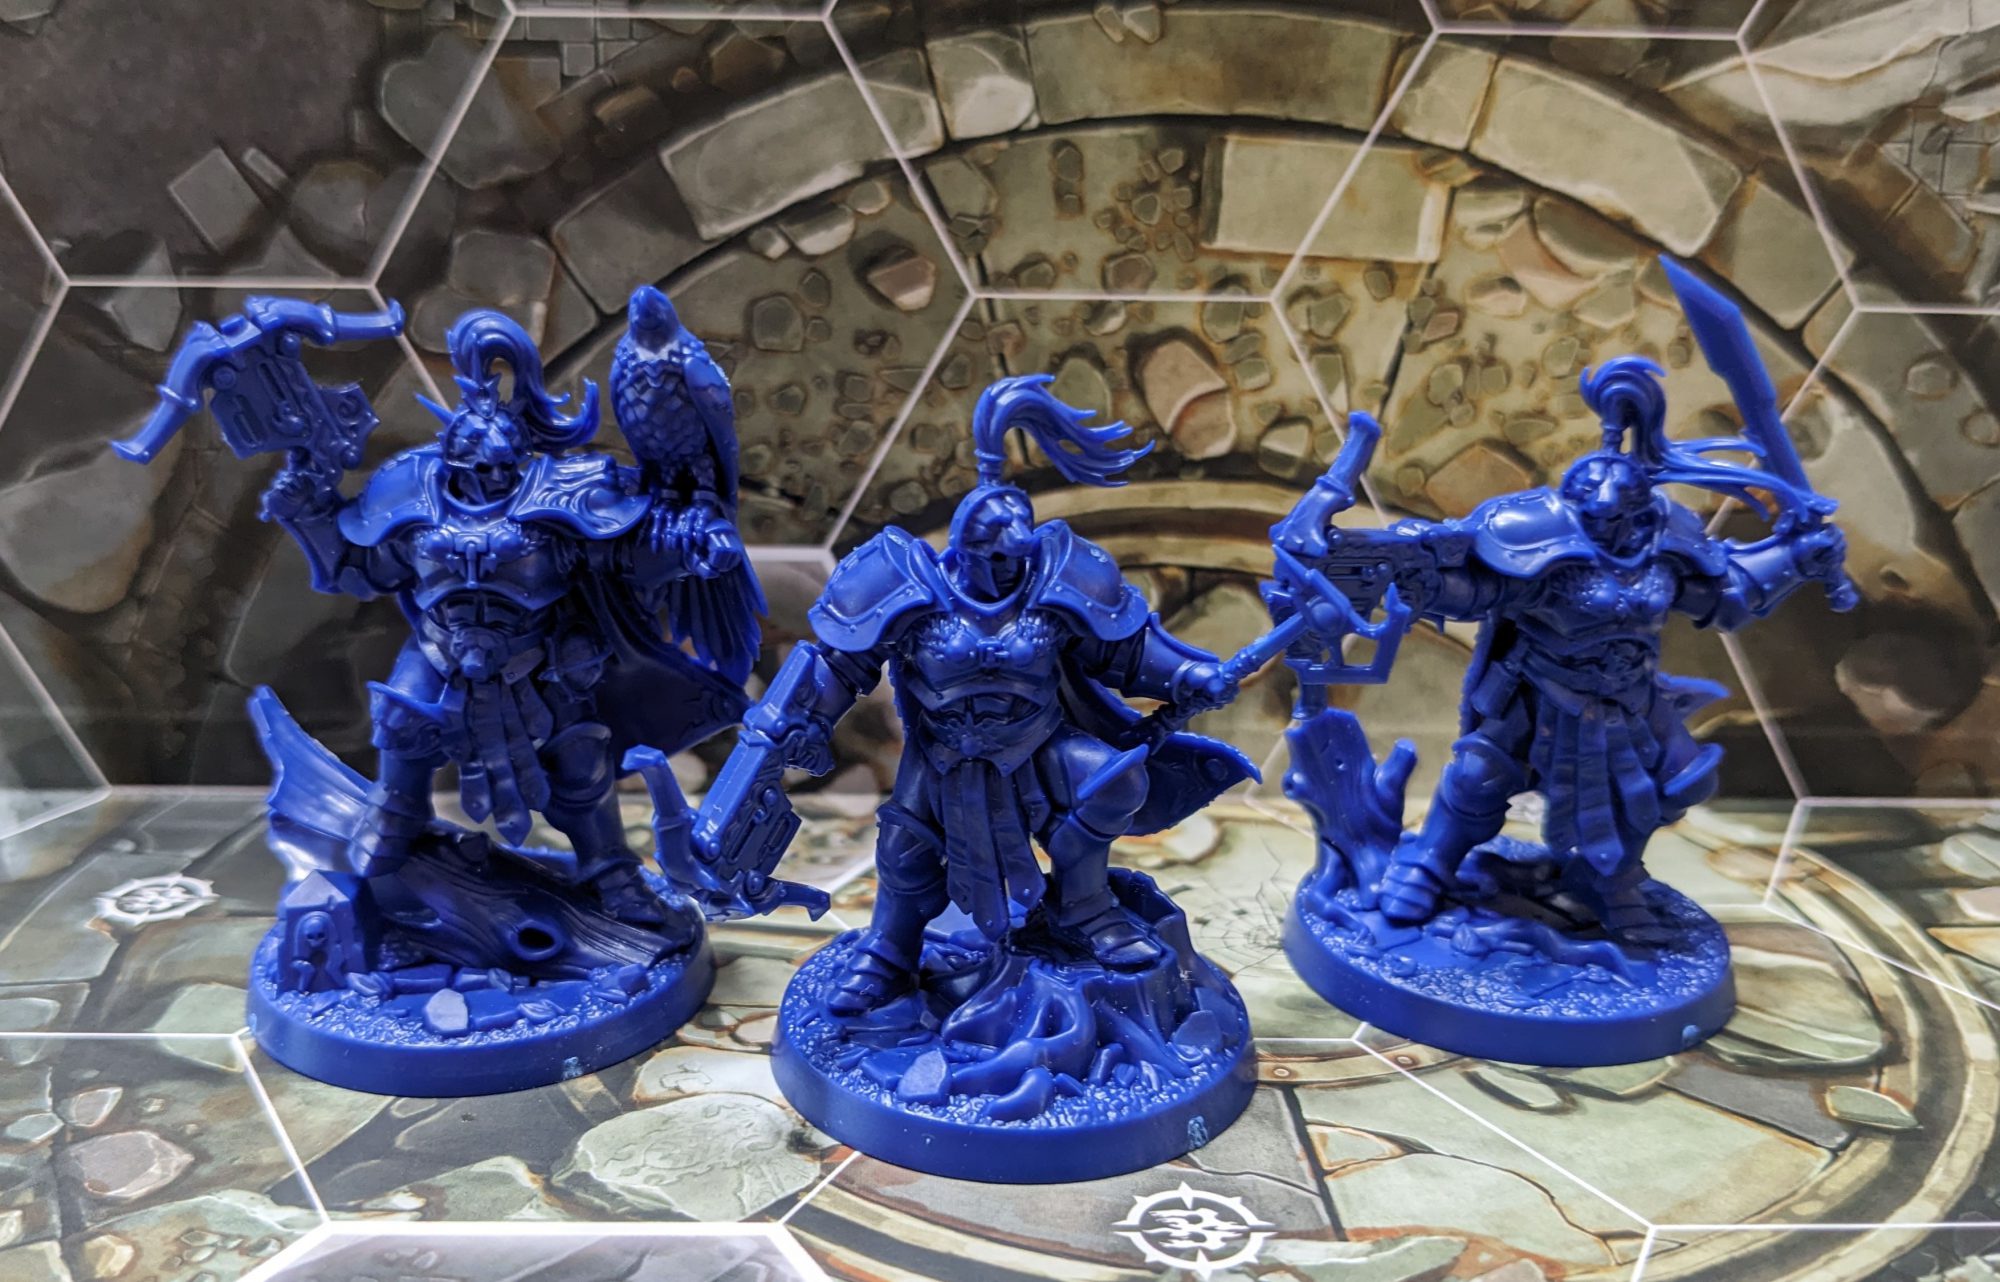 Warhammer Underworlds' new starter set eases players into the miniatures  skirmish game waters